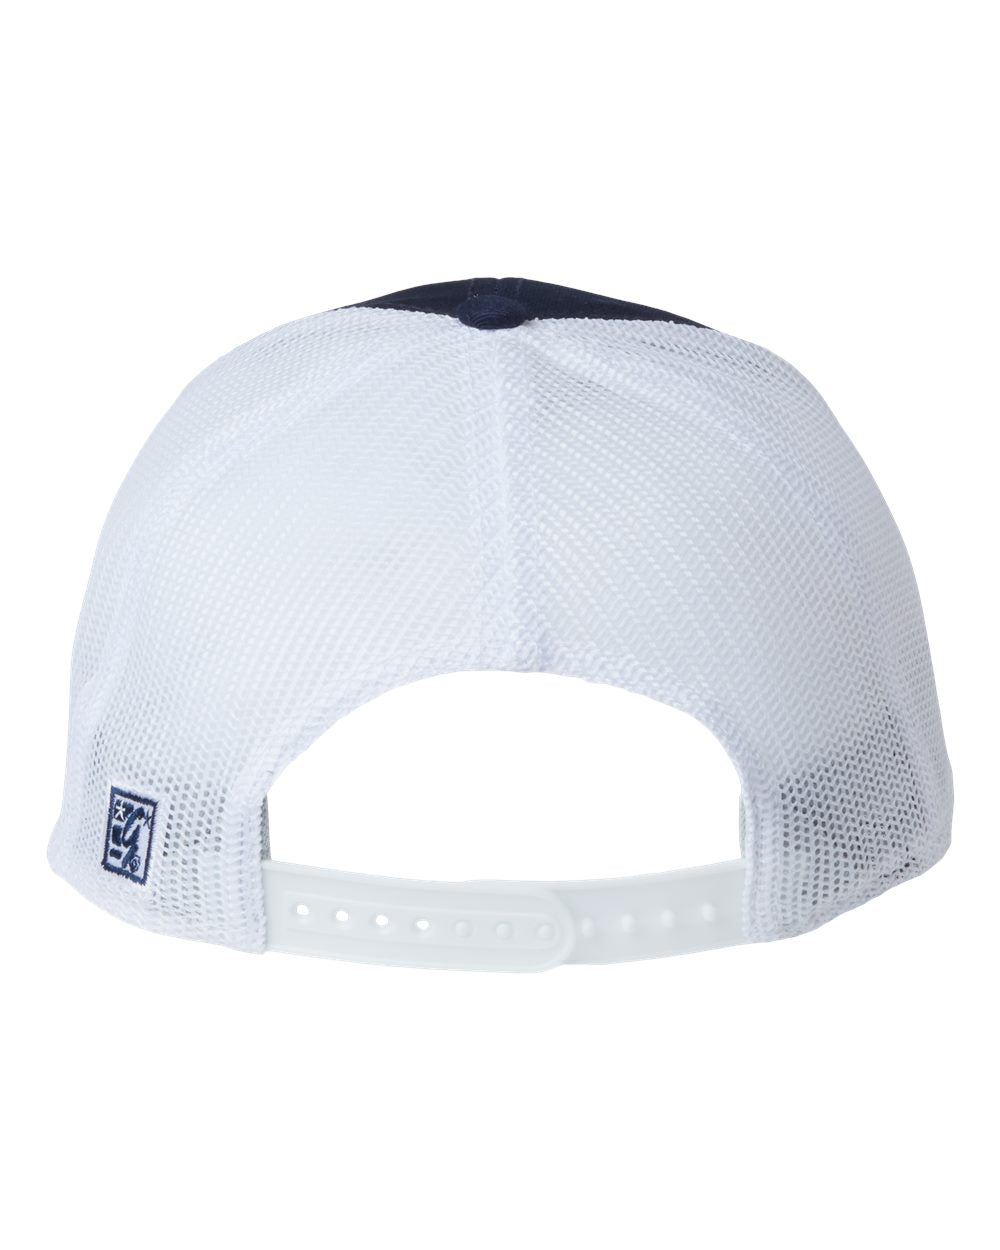 The Game Everyday Trucker Cap GB452E #color_Navy/ White